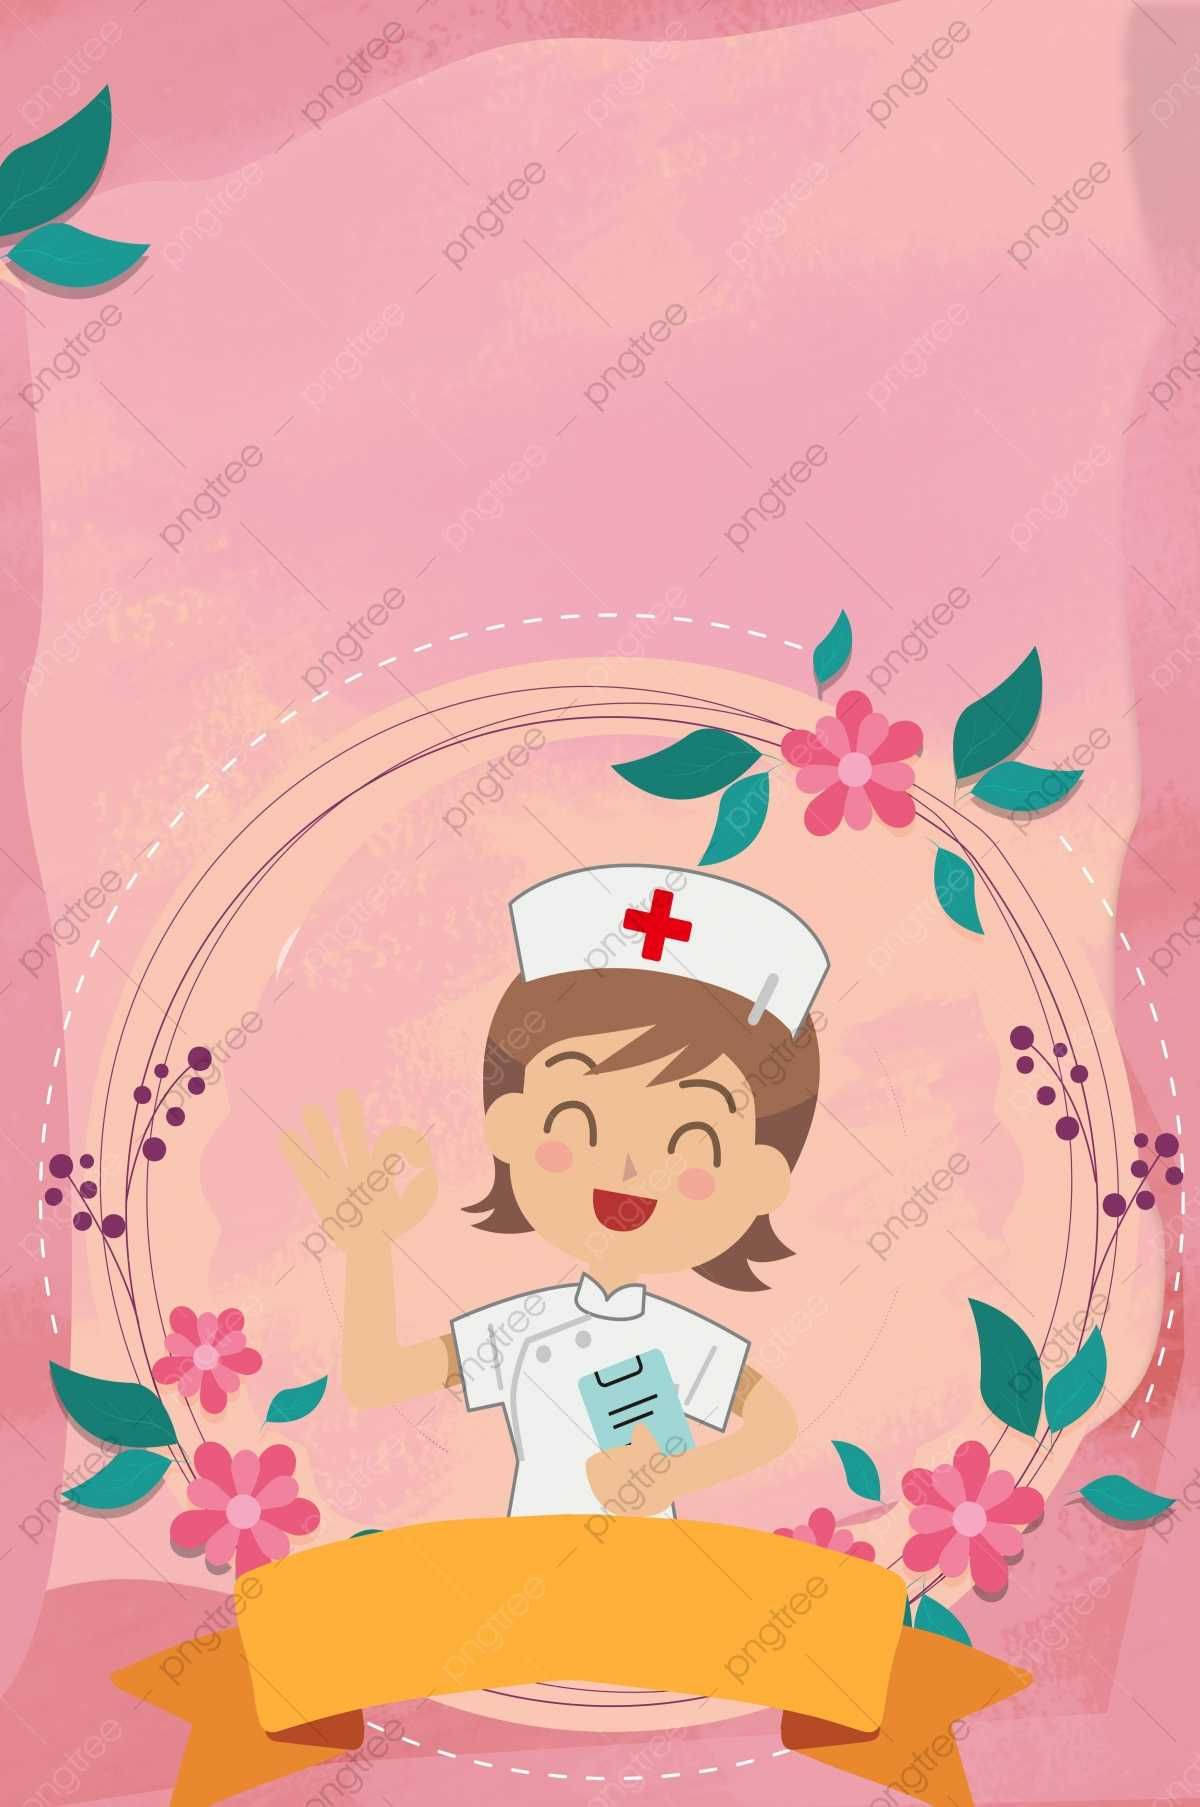 Nurse Wallpapers 53 pictures